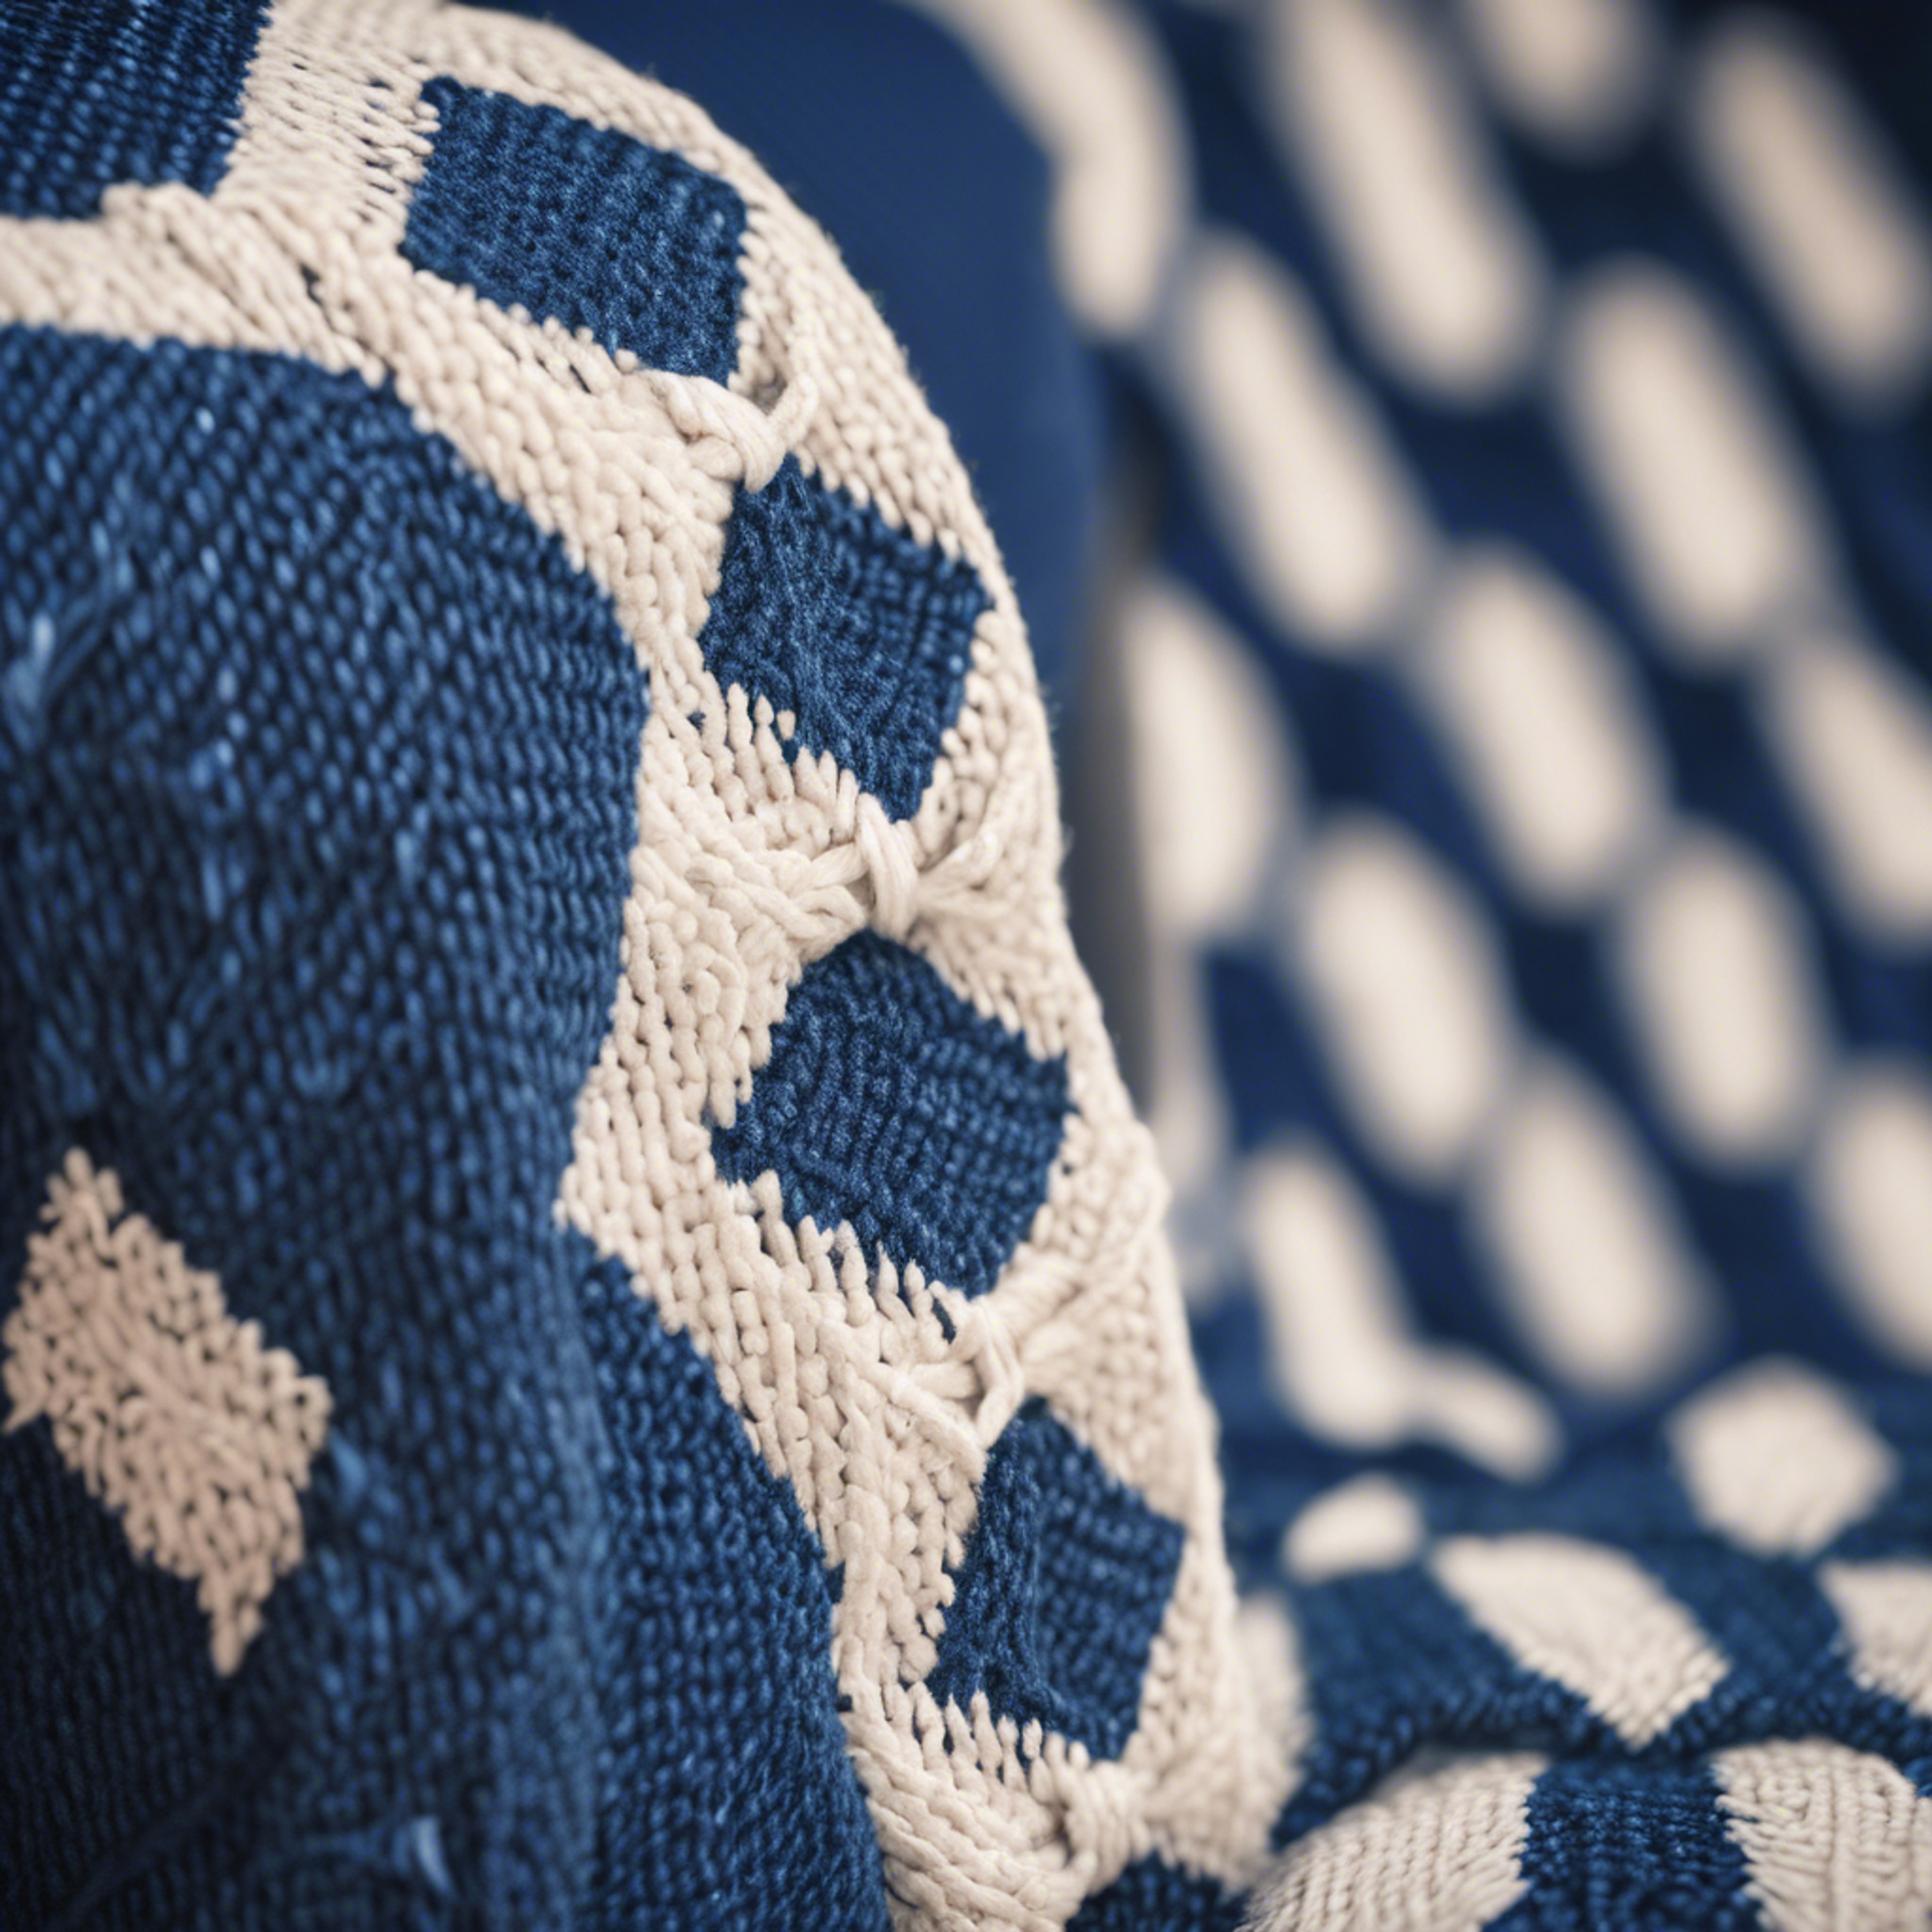 A close view of a preppy styled blue and white diamond-patterned sweater draped over a chair.壁紙[0af6246e15d04e86a483]